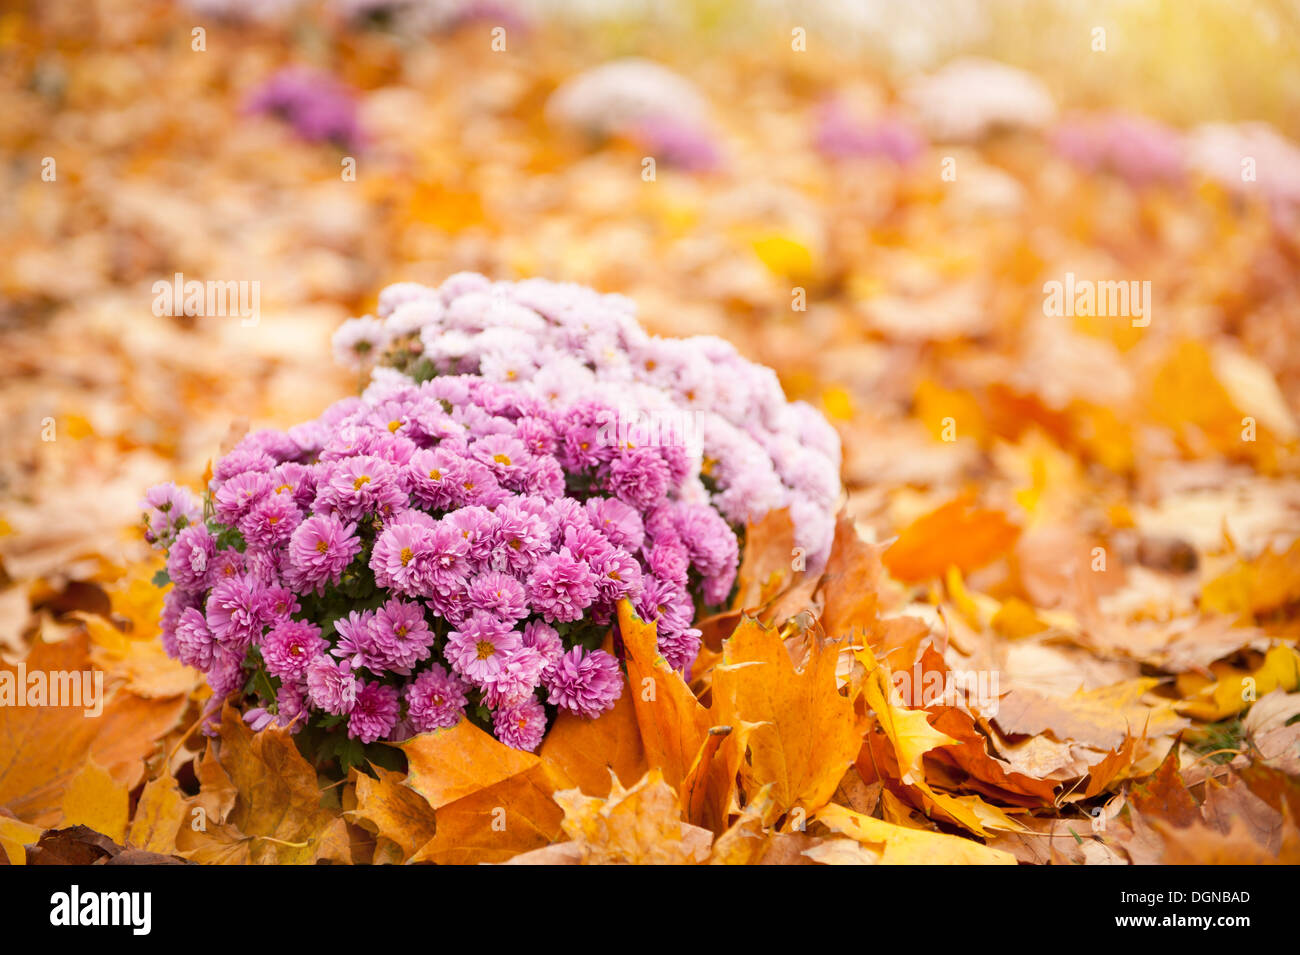 Dendranthema or Chrysanthemum in autumn leaves Stock Photo